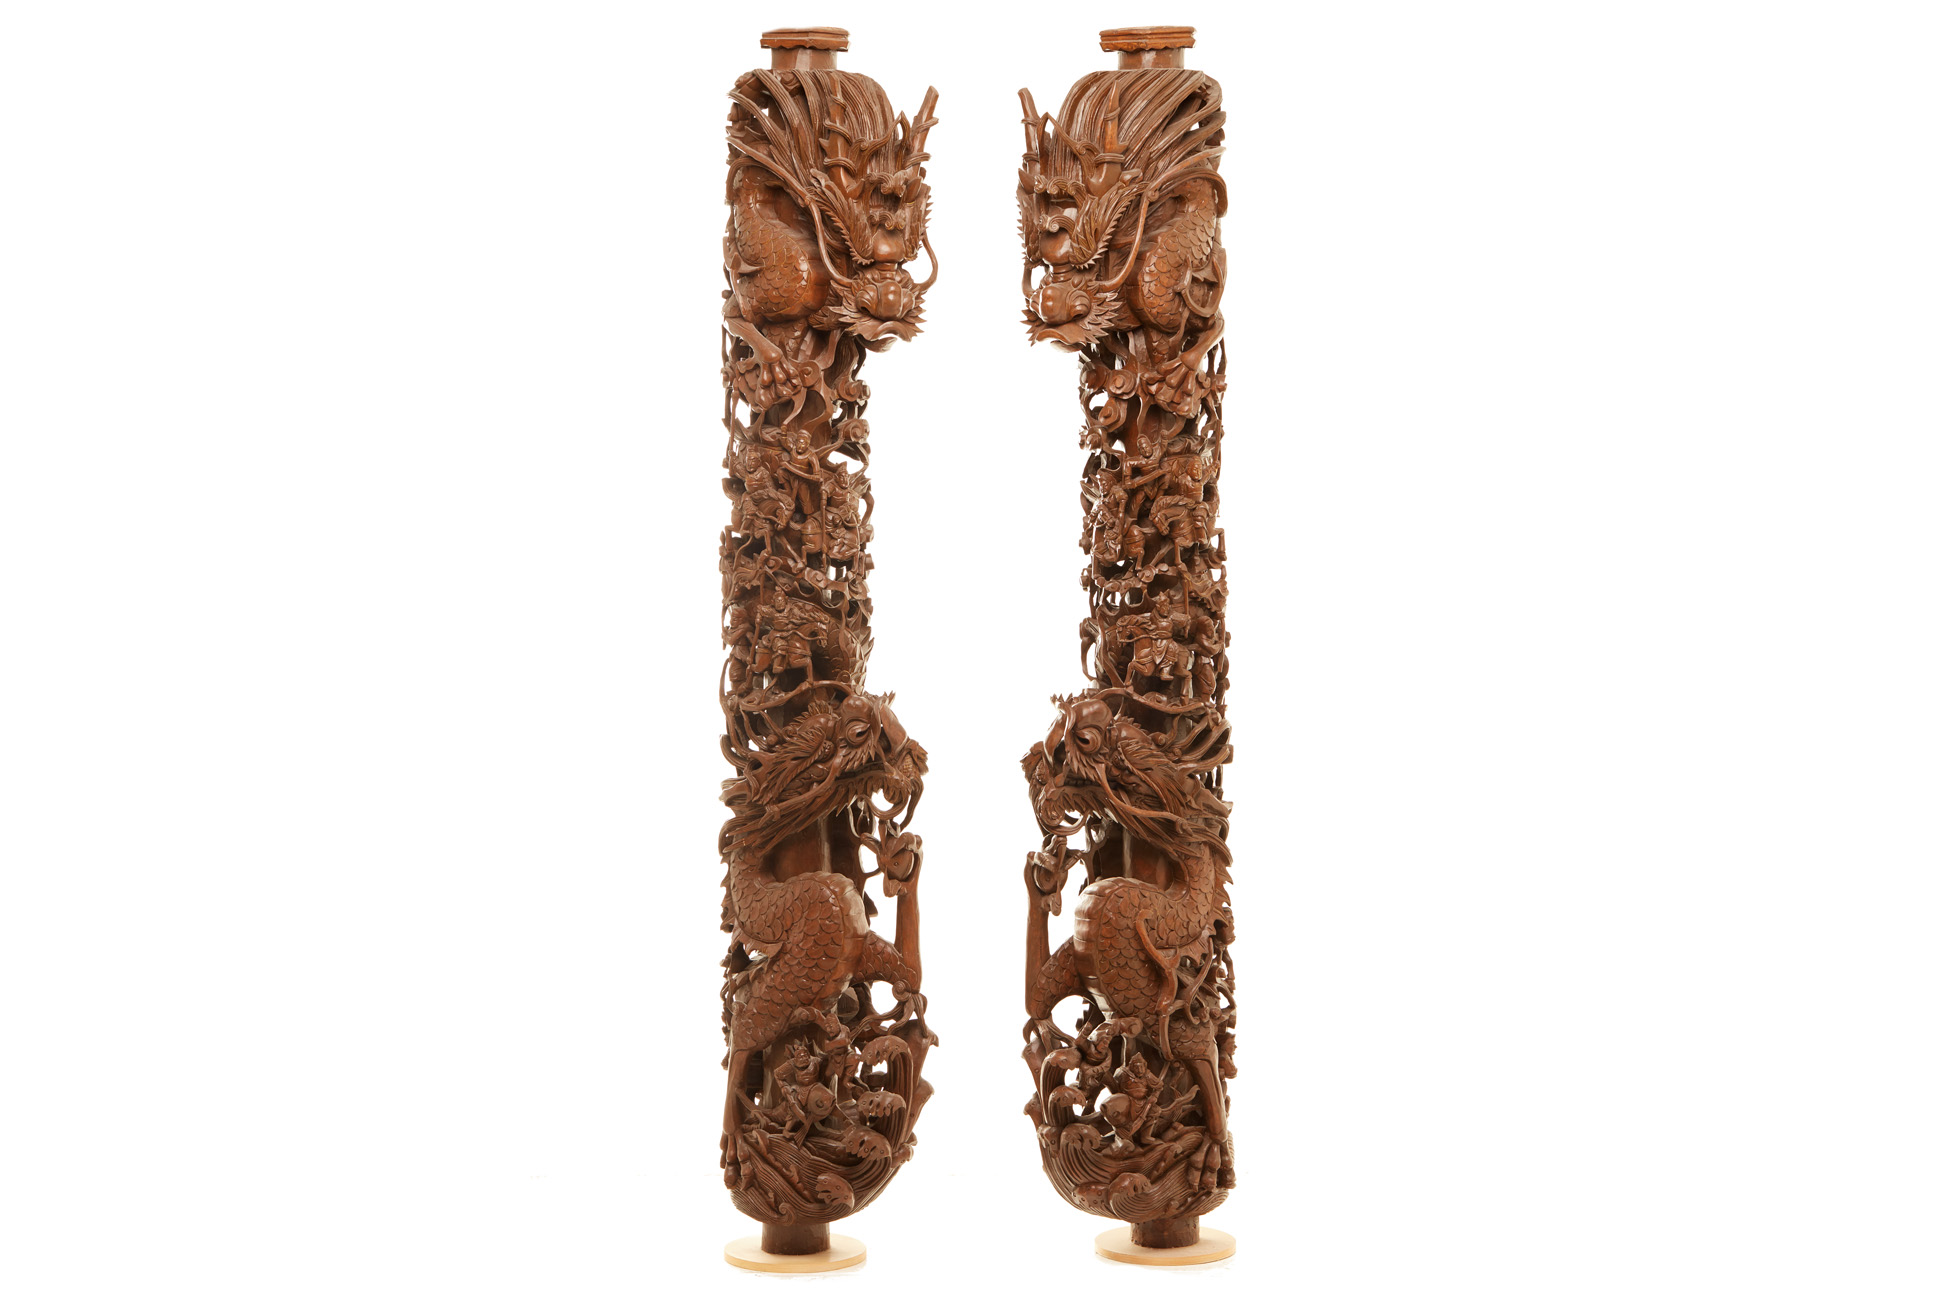 A PAIR OF LARGE CARVED WOOD 'WAR SCENE' PILLARS